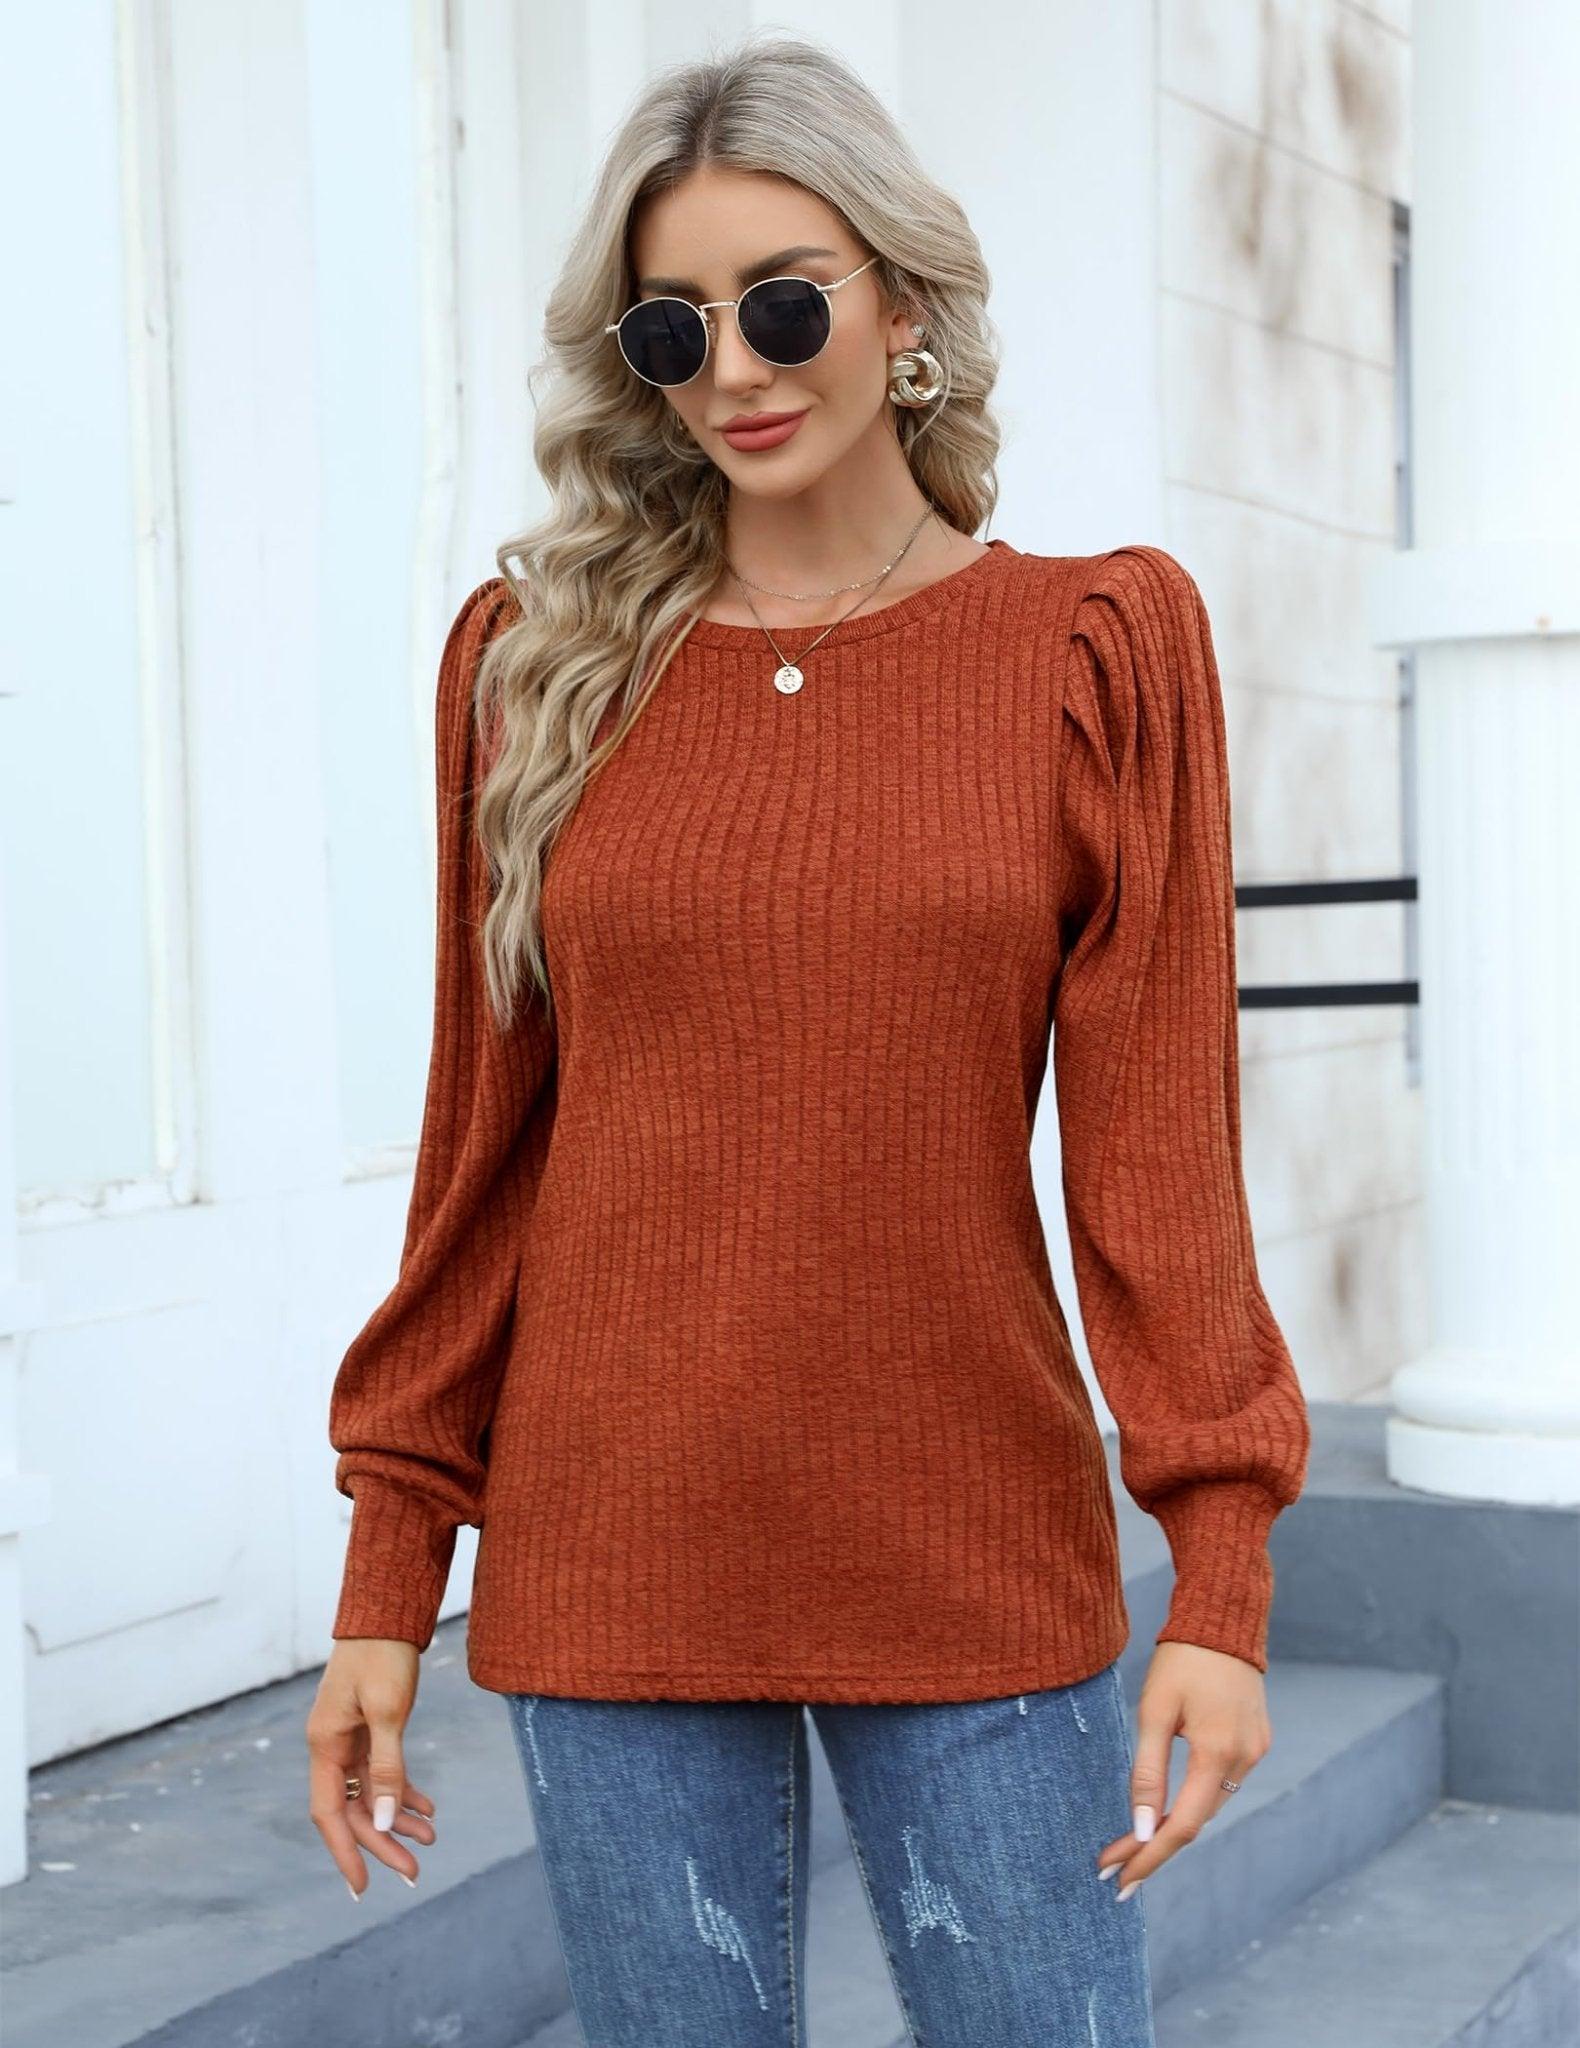 HOTOUCH Ladies Knitted Shirts Cute Puff Long Sleeve Blouse Tops Soft Round Neck Work Tunic Outefits Caramel M - Bona Fide Fashion